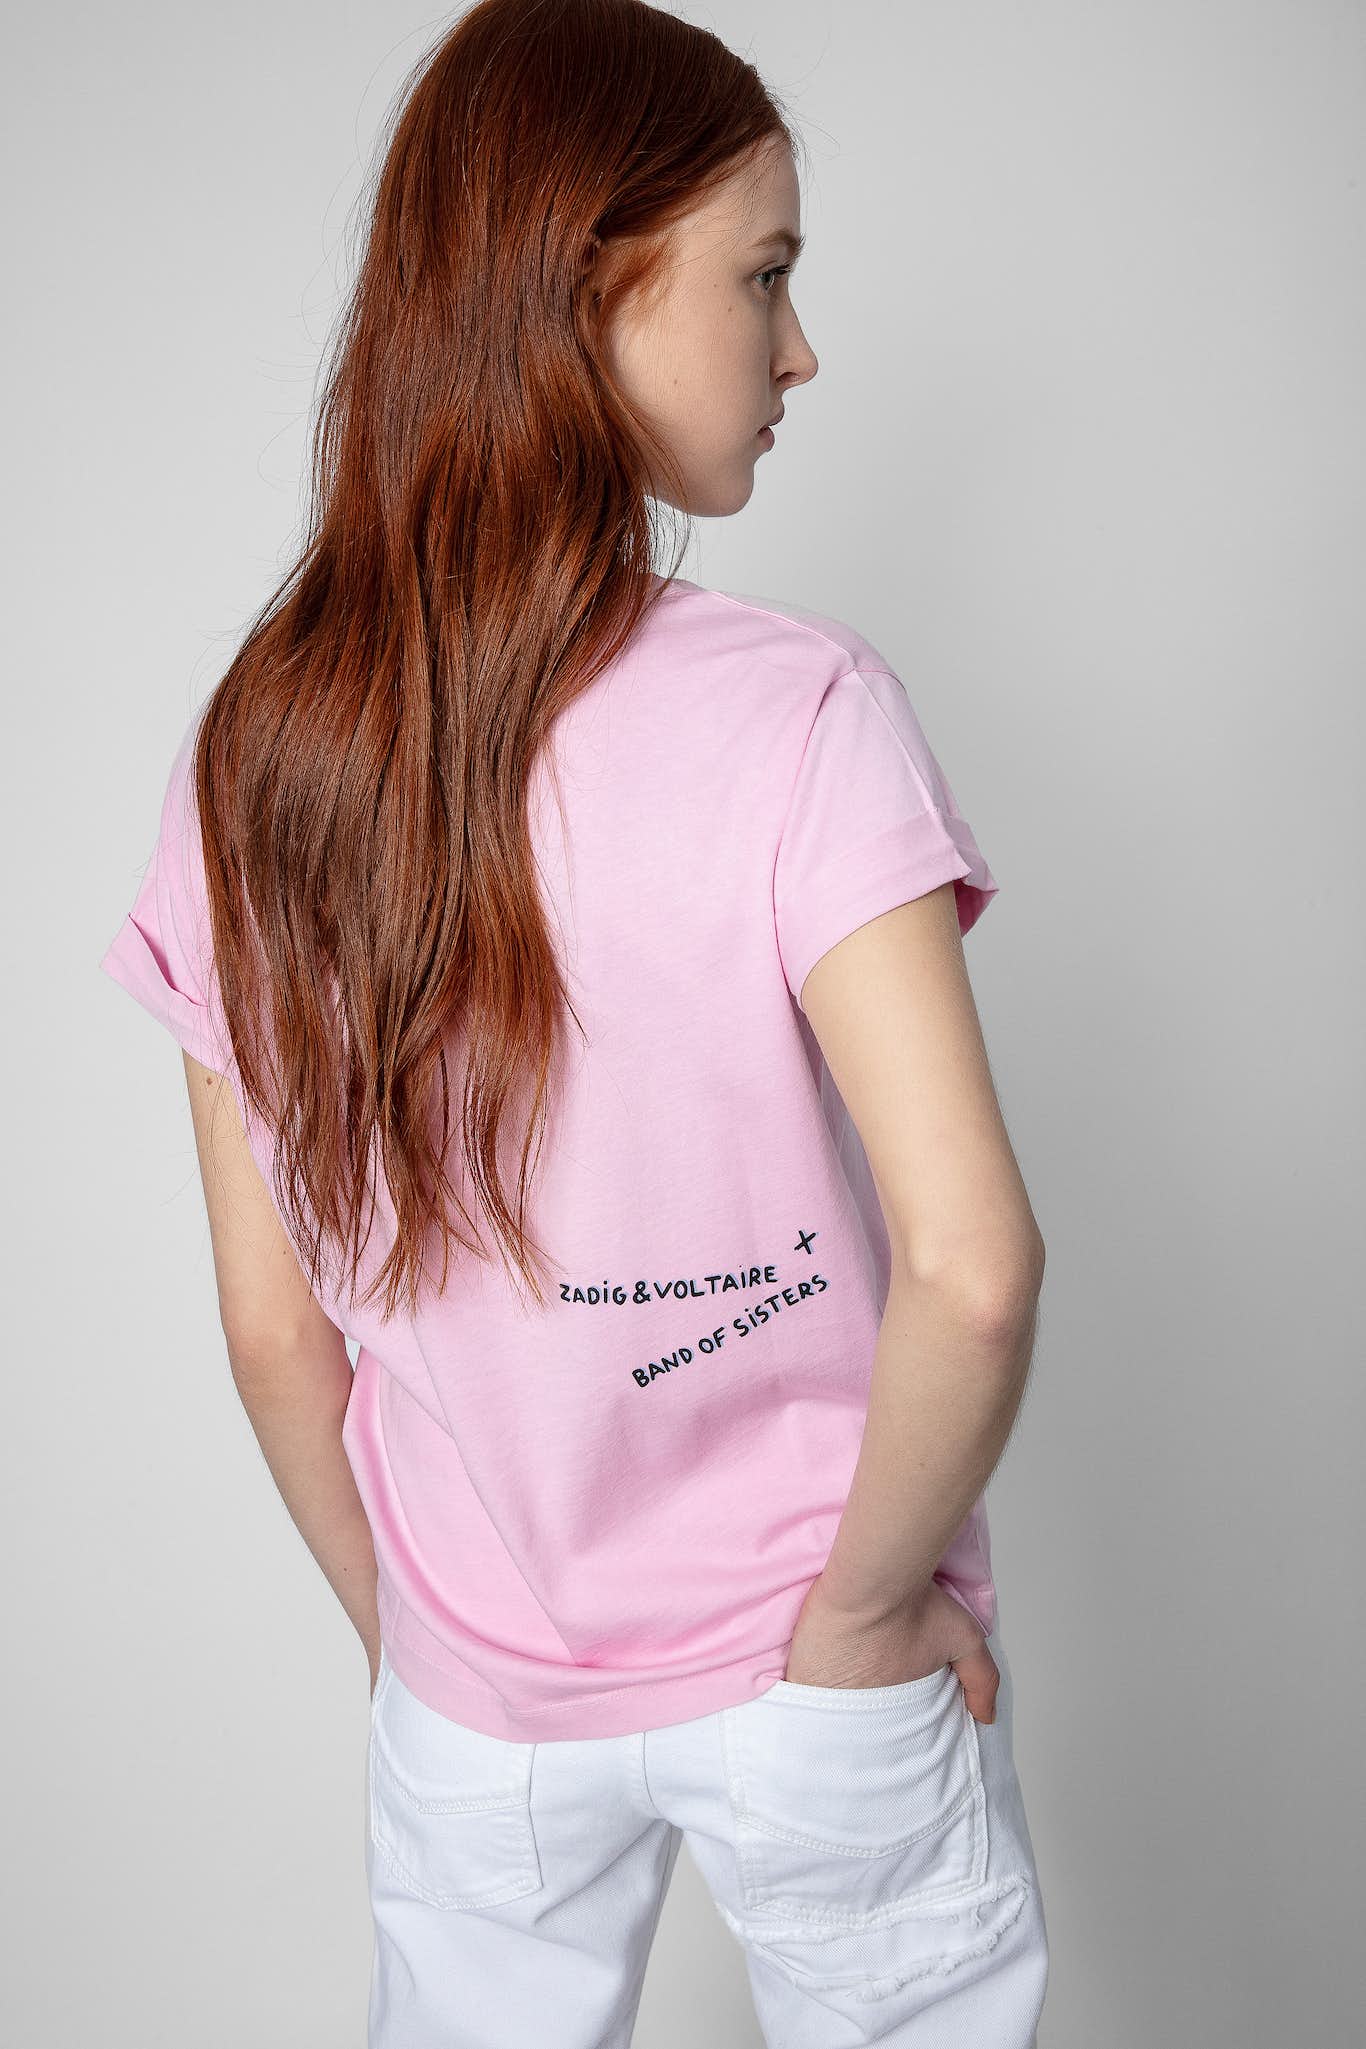 T-Shirt Anya Band of Sisters - Candy Pink bedruckt